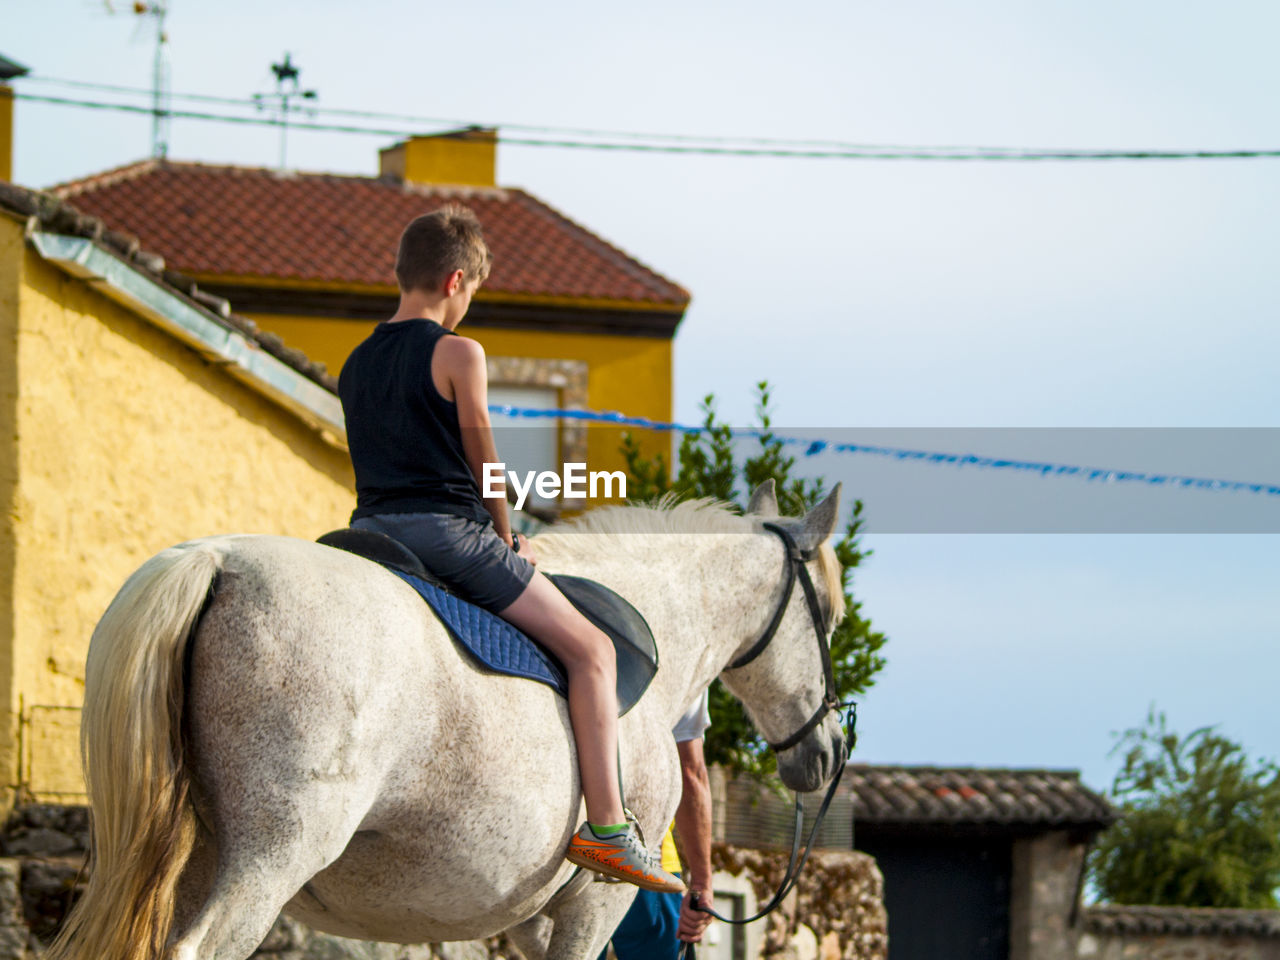 Boy riding horse by house against sky